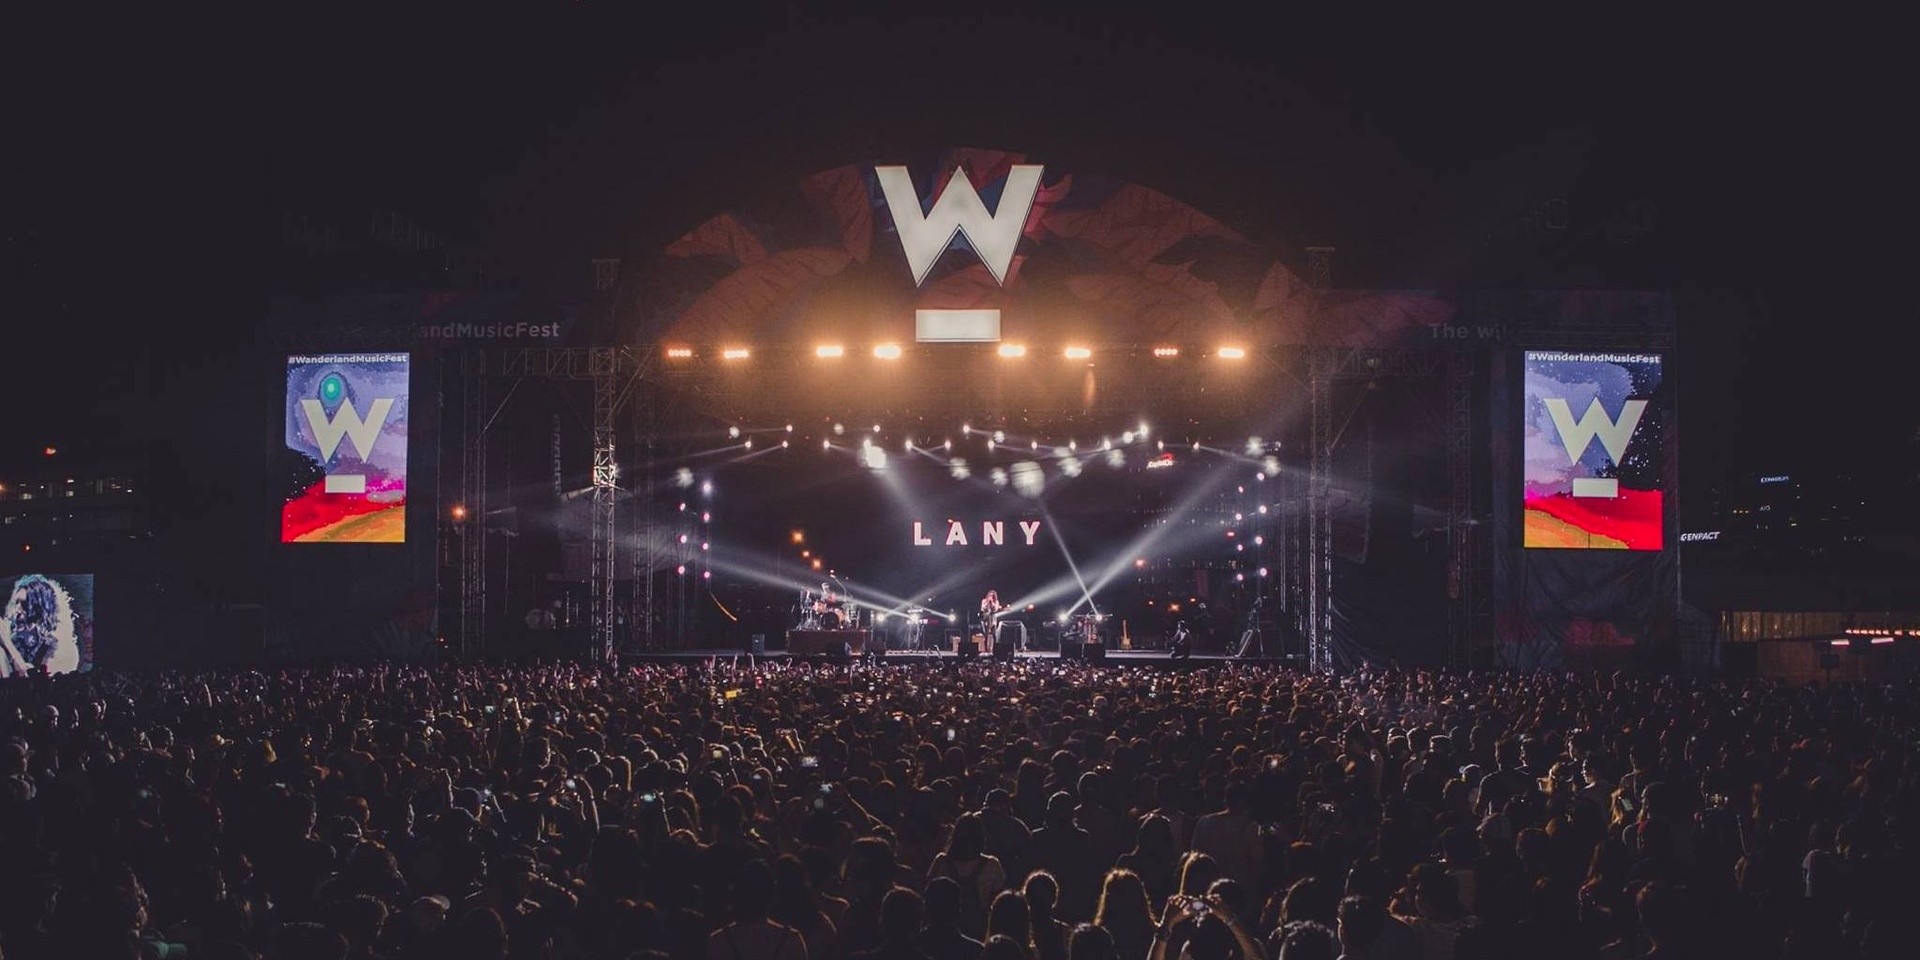 Relive Wanderland 2017 through their official aftermovie - watch